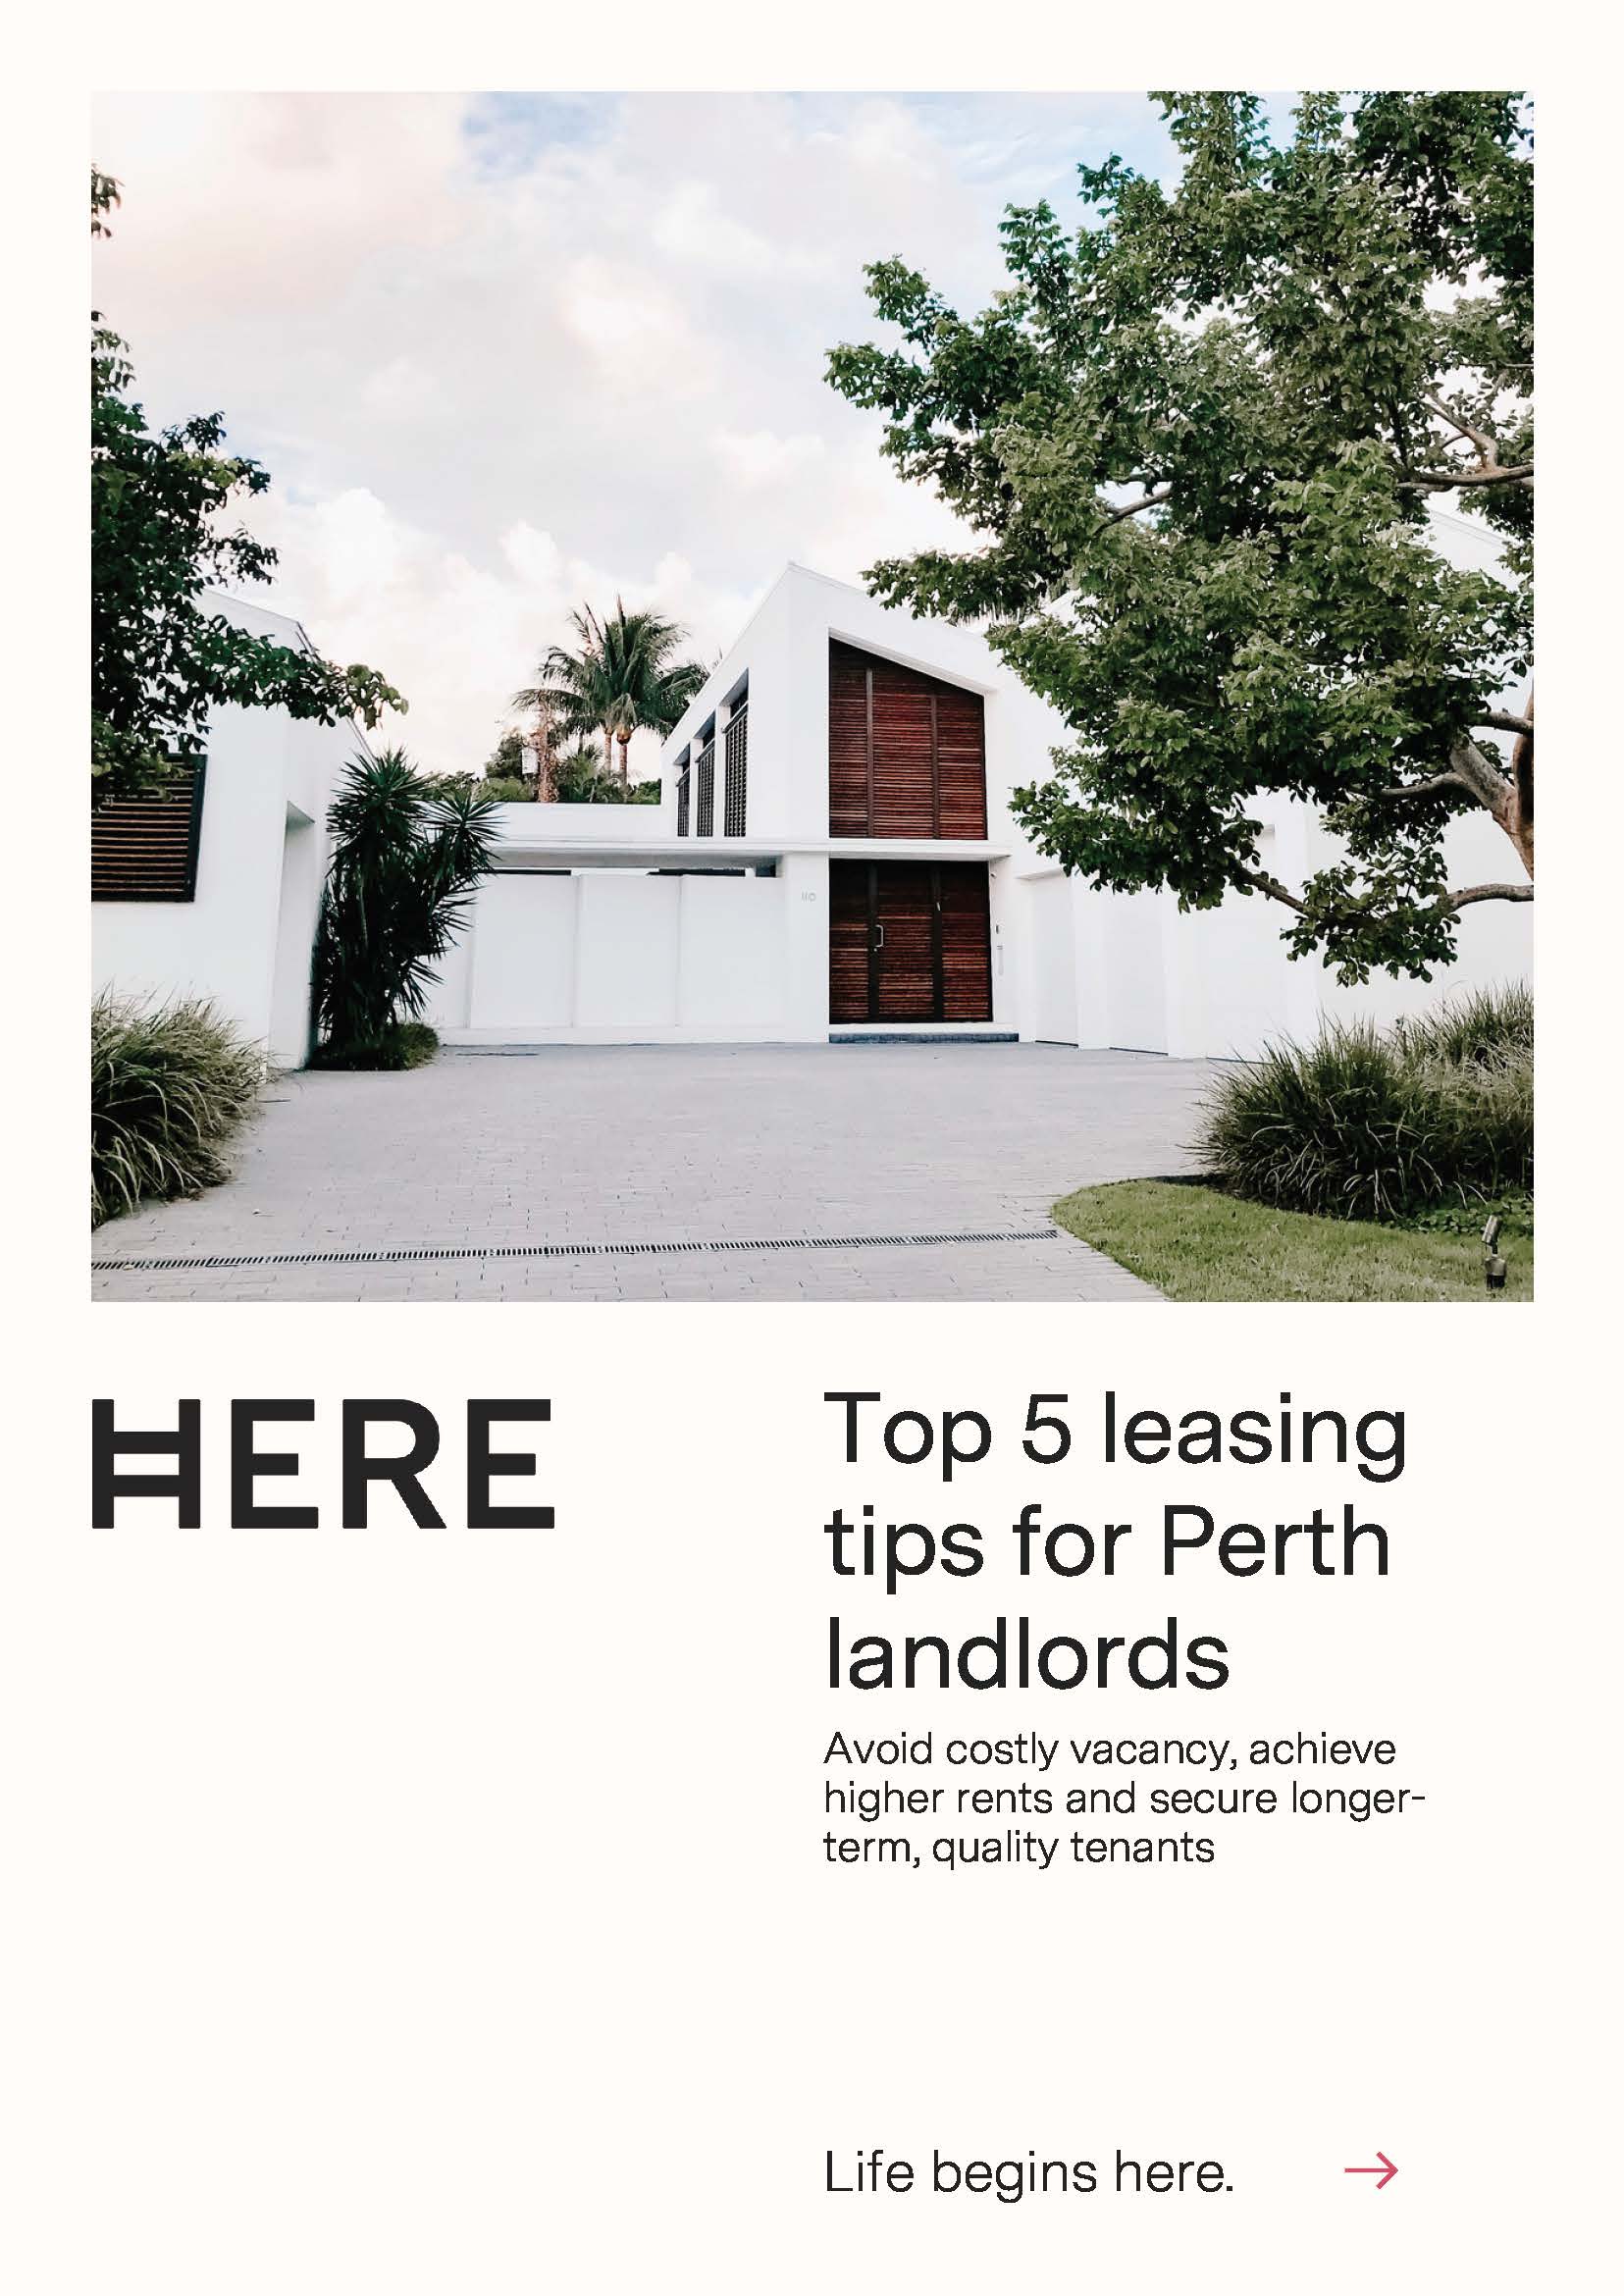 Top 5 Leasing Tips for Perth Landlords eBook cover